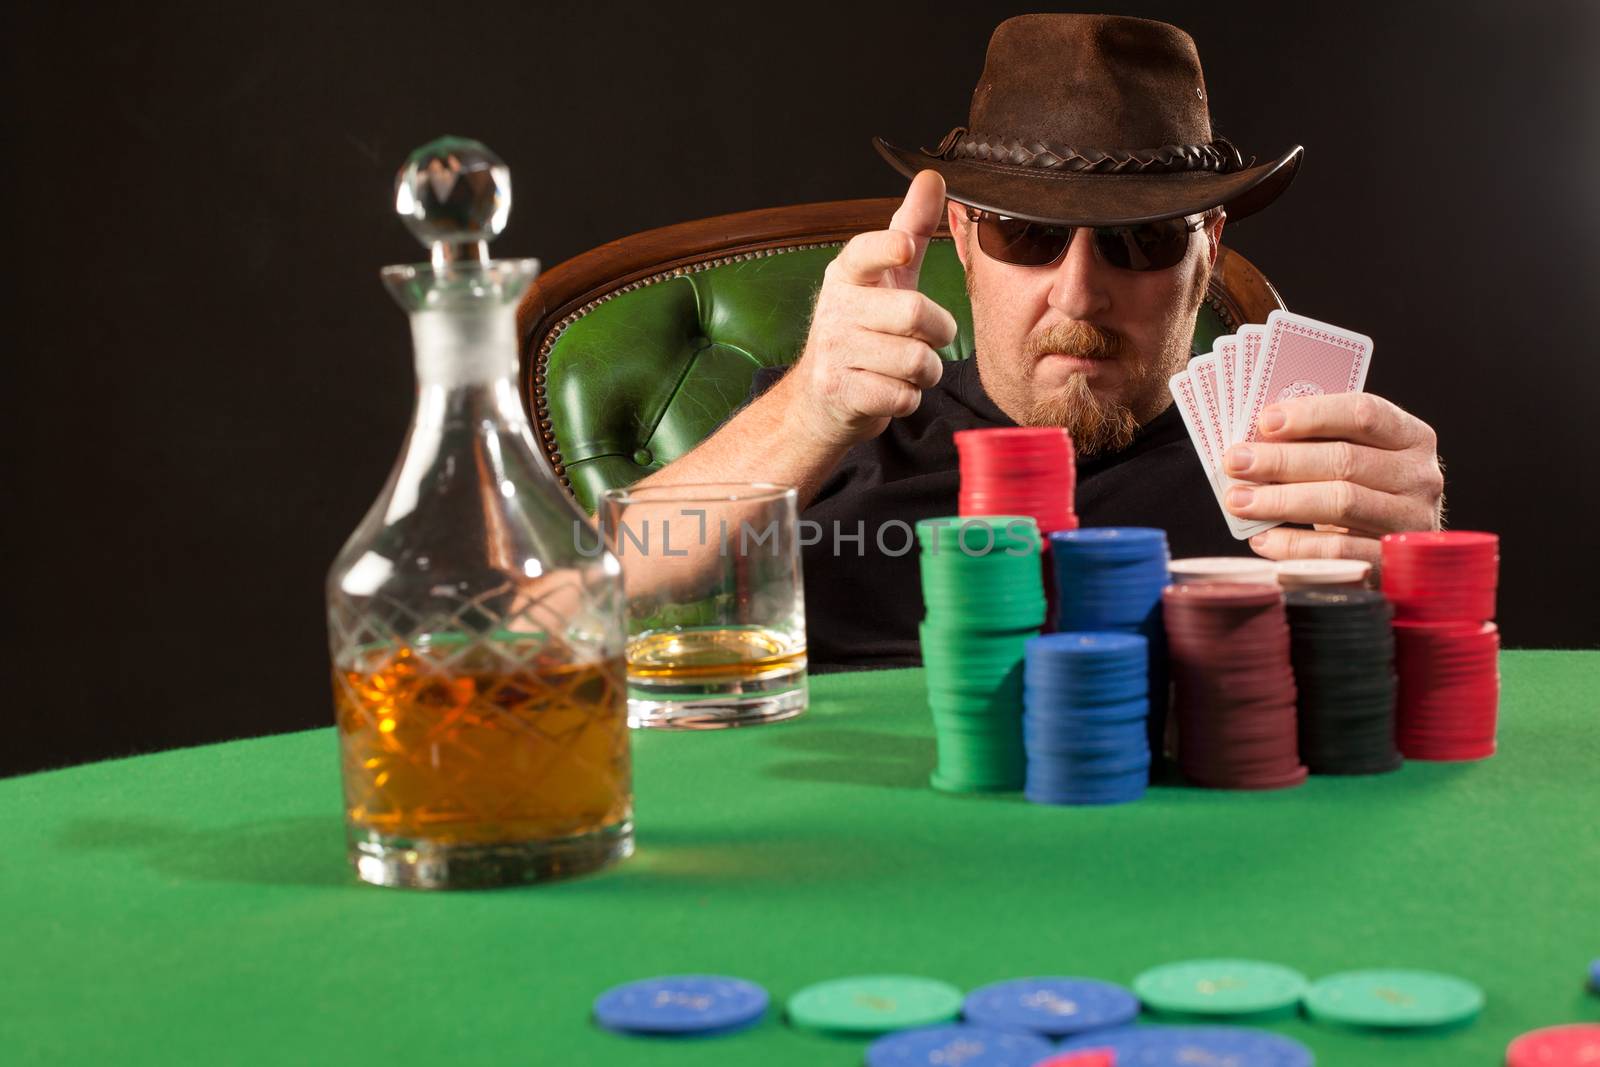 Photo of a man playing poker while wearing sunglasses and a hat.
